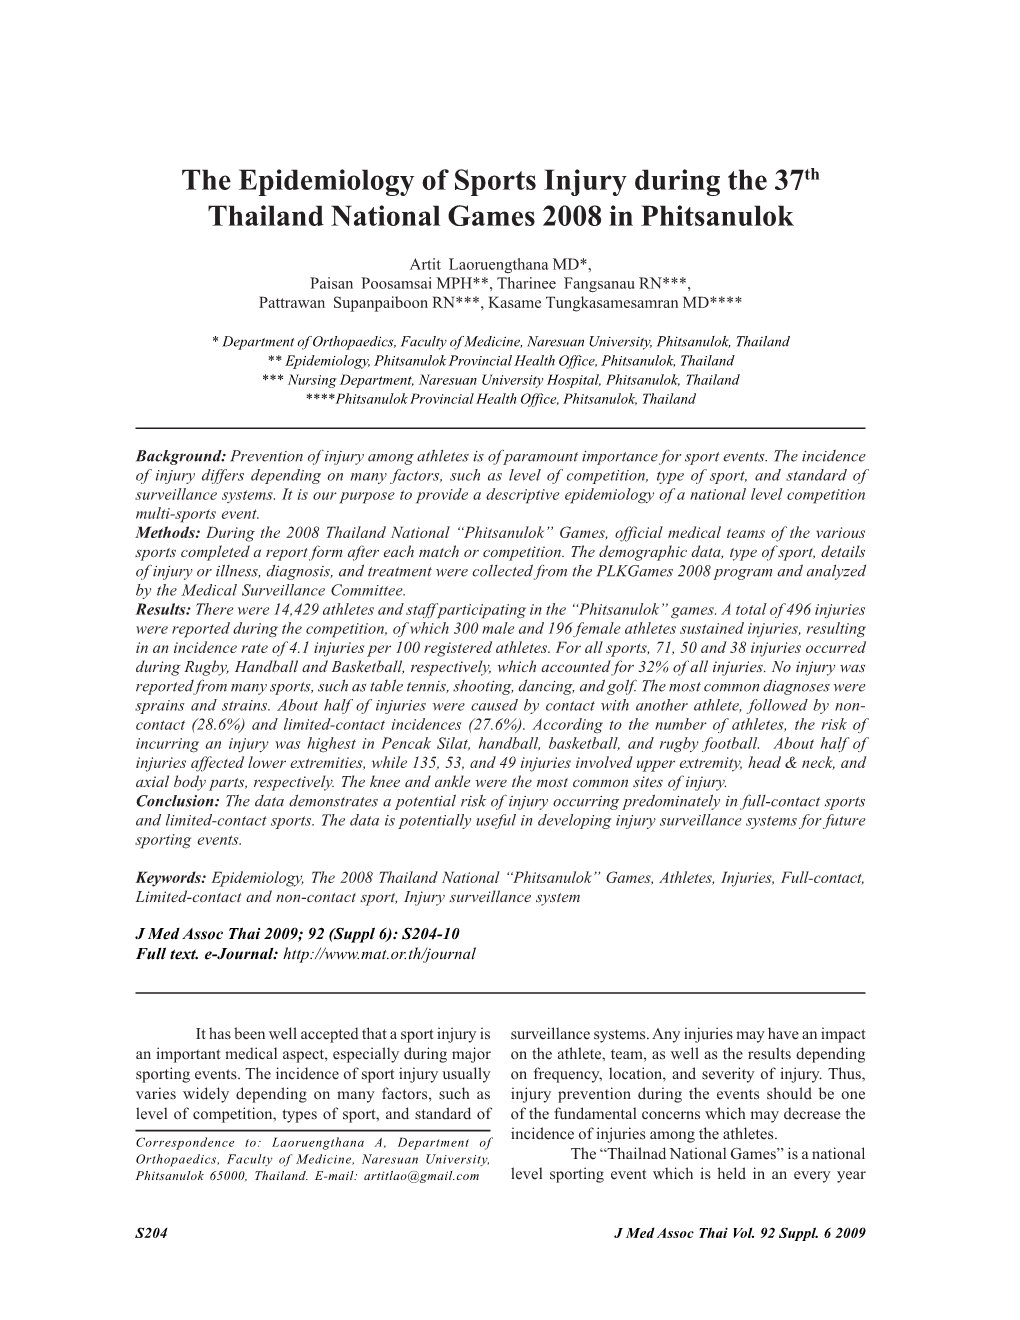 The Epidemiology of Sports Injury During the 37Th Thailand National Games 2008 in Phitsanulok